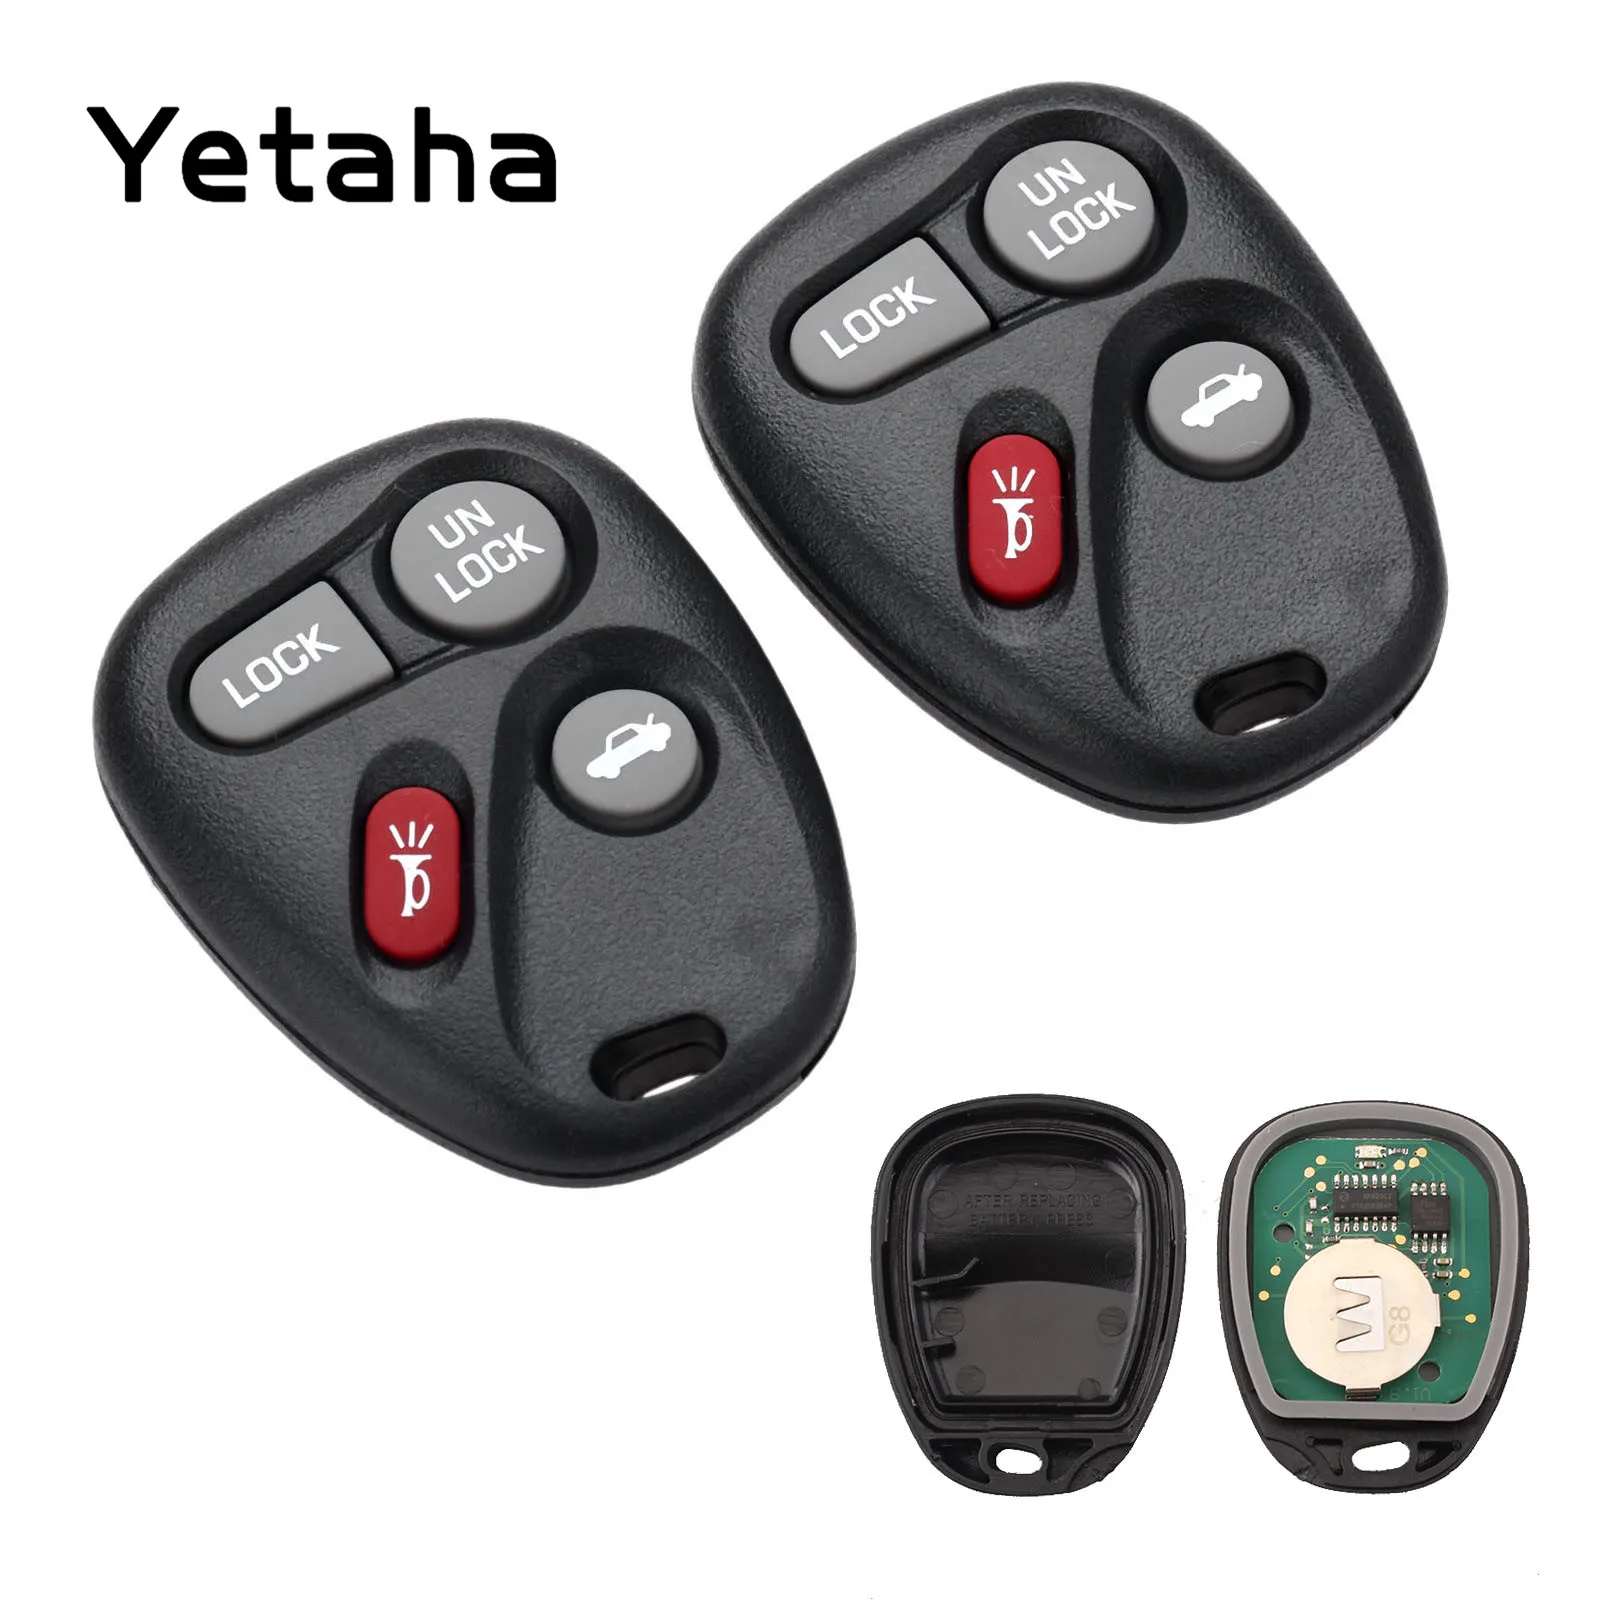 2x New Replacement Keyless Entry Remote Key Fob For Buick Pontiac & Oldsmobile